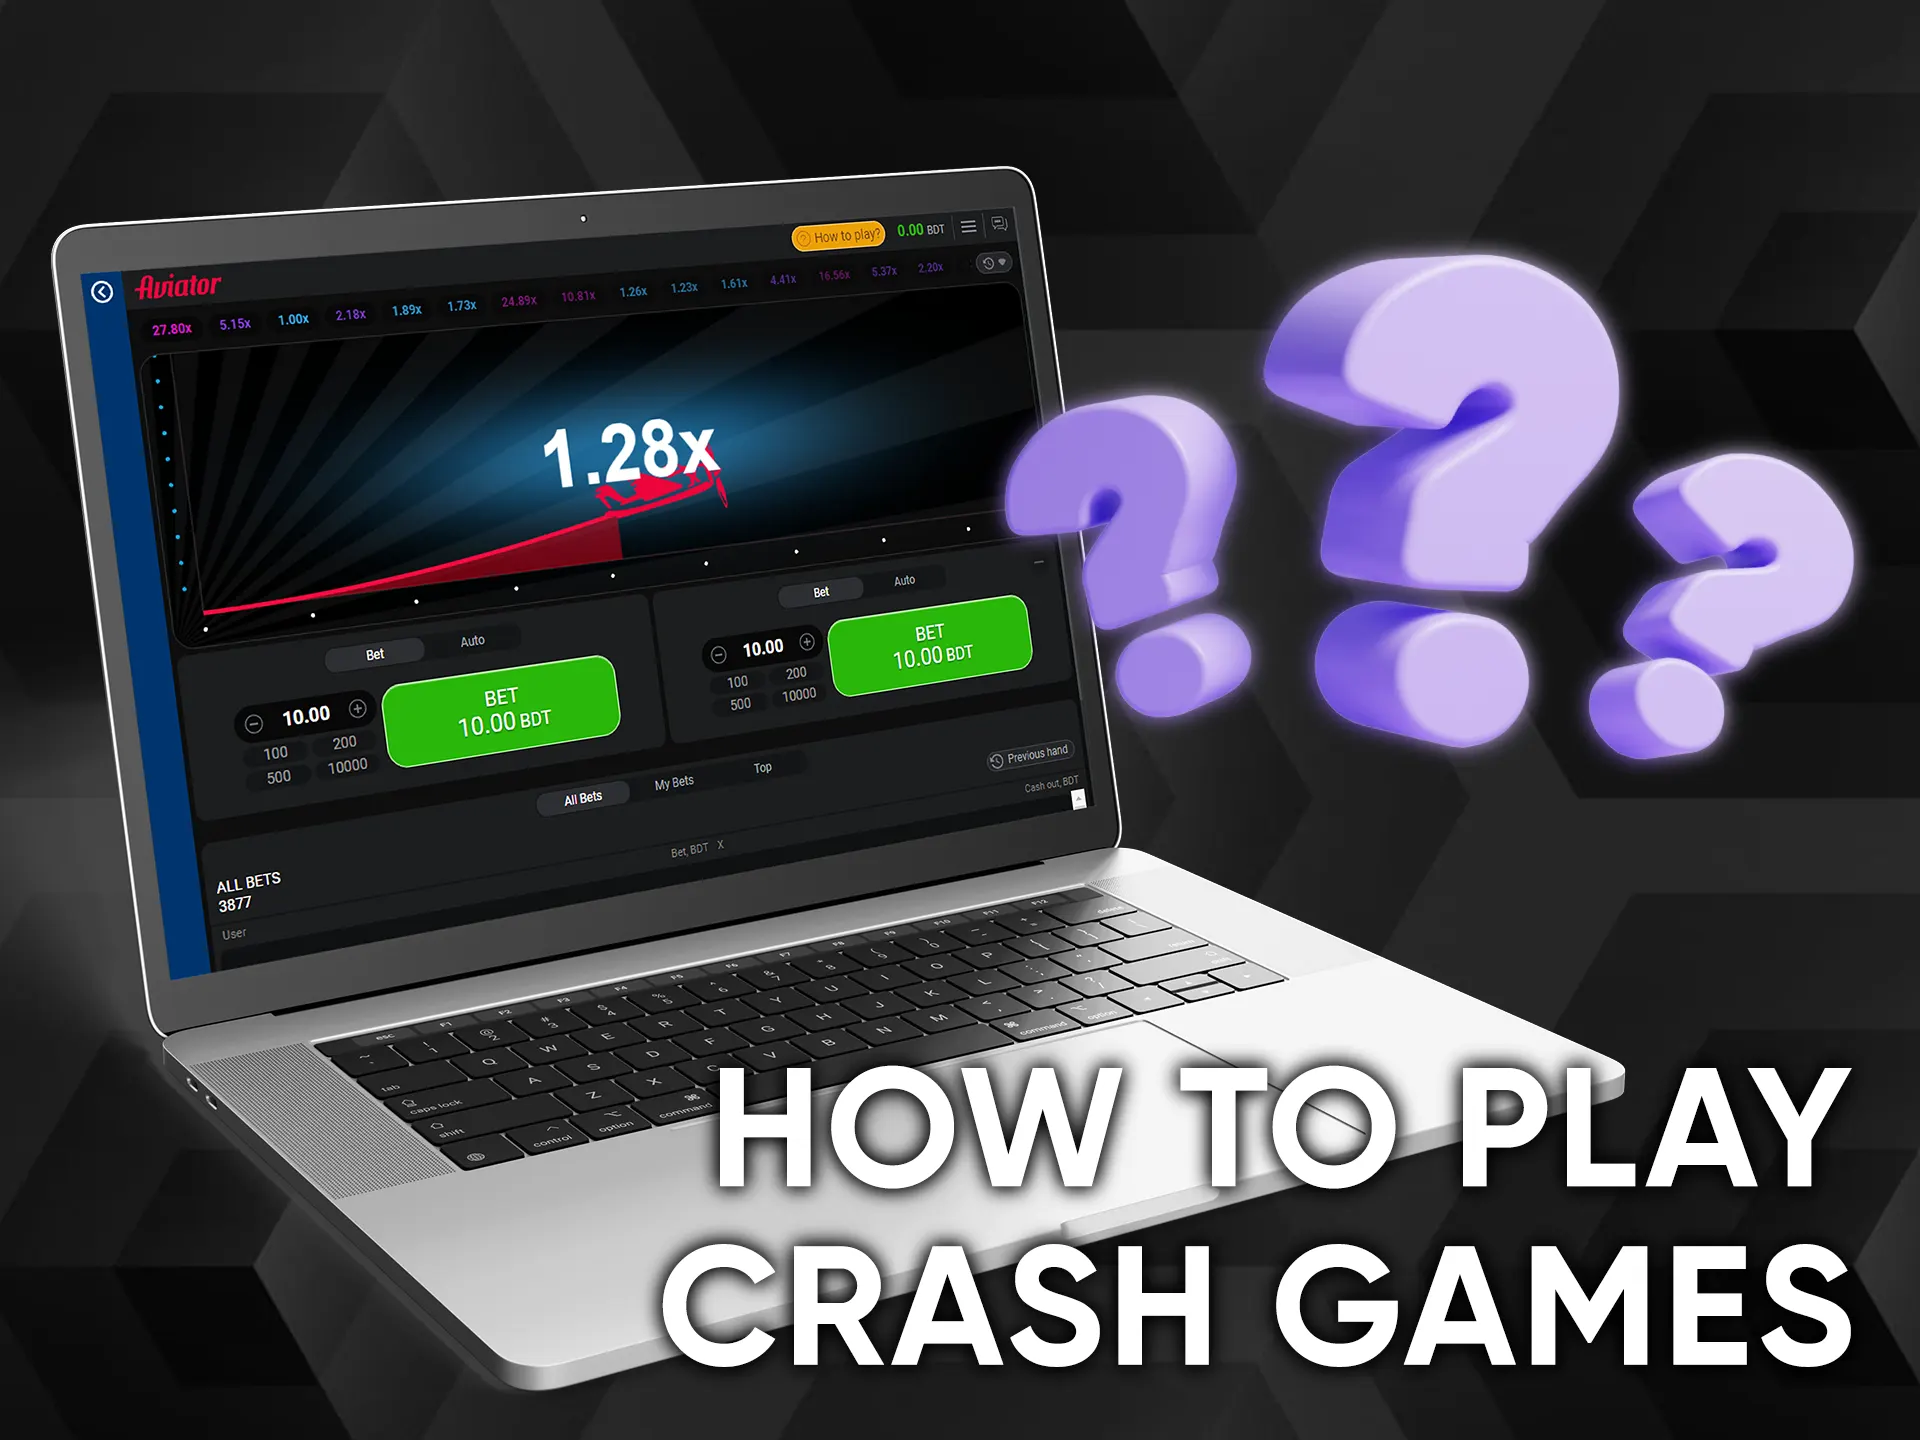 It's easy to play crash games.